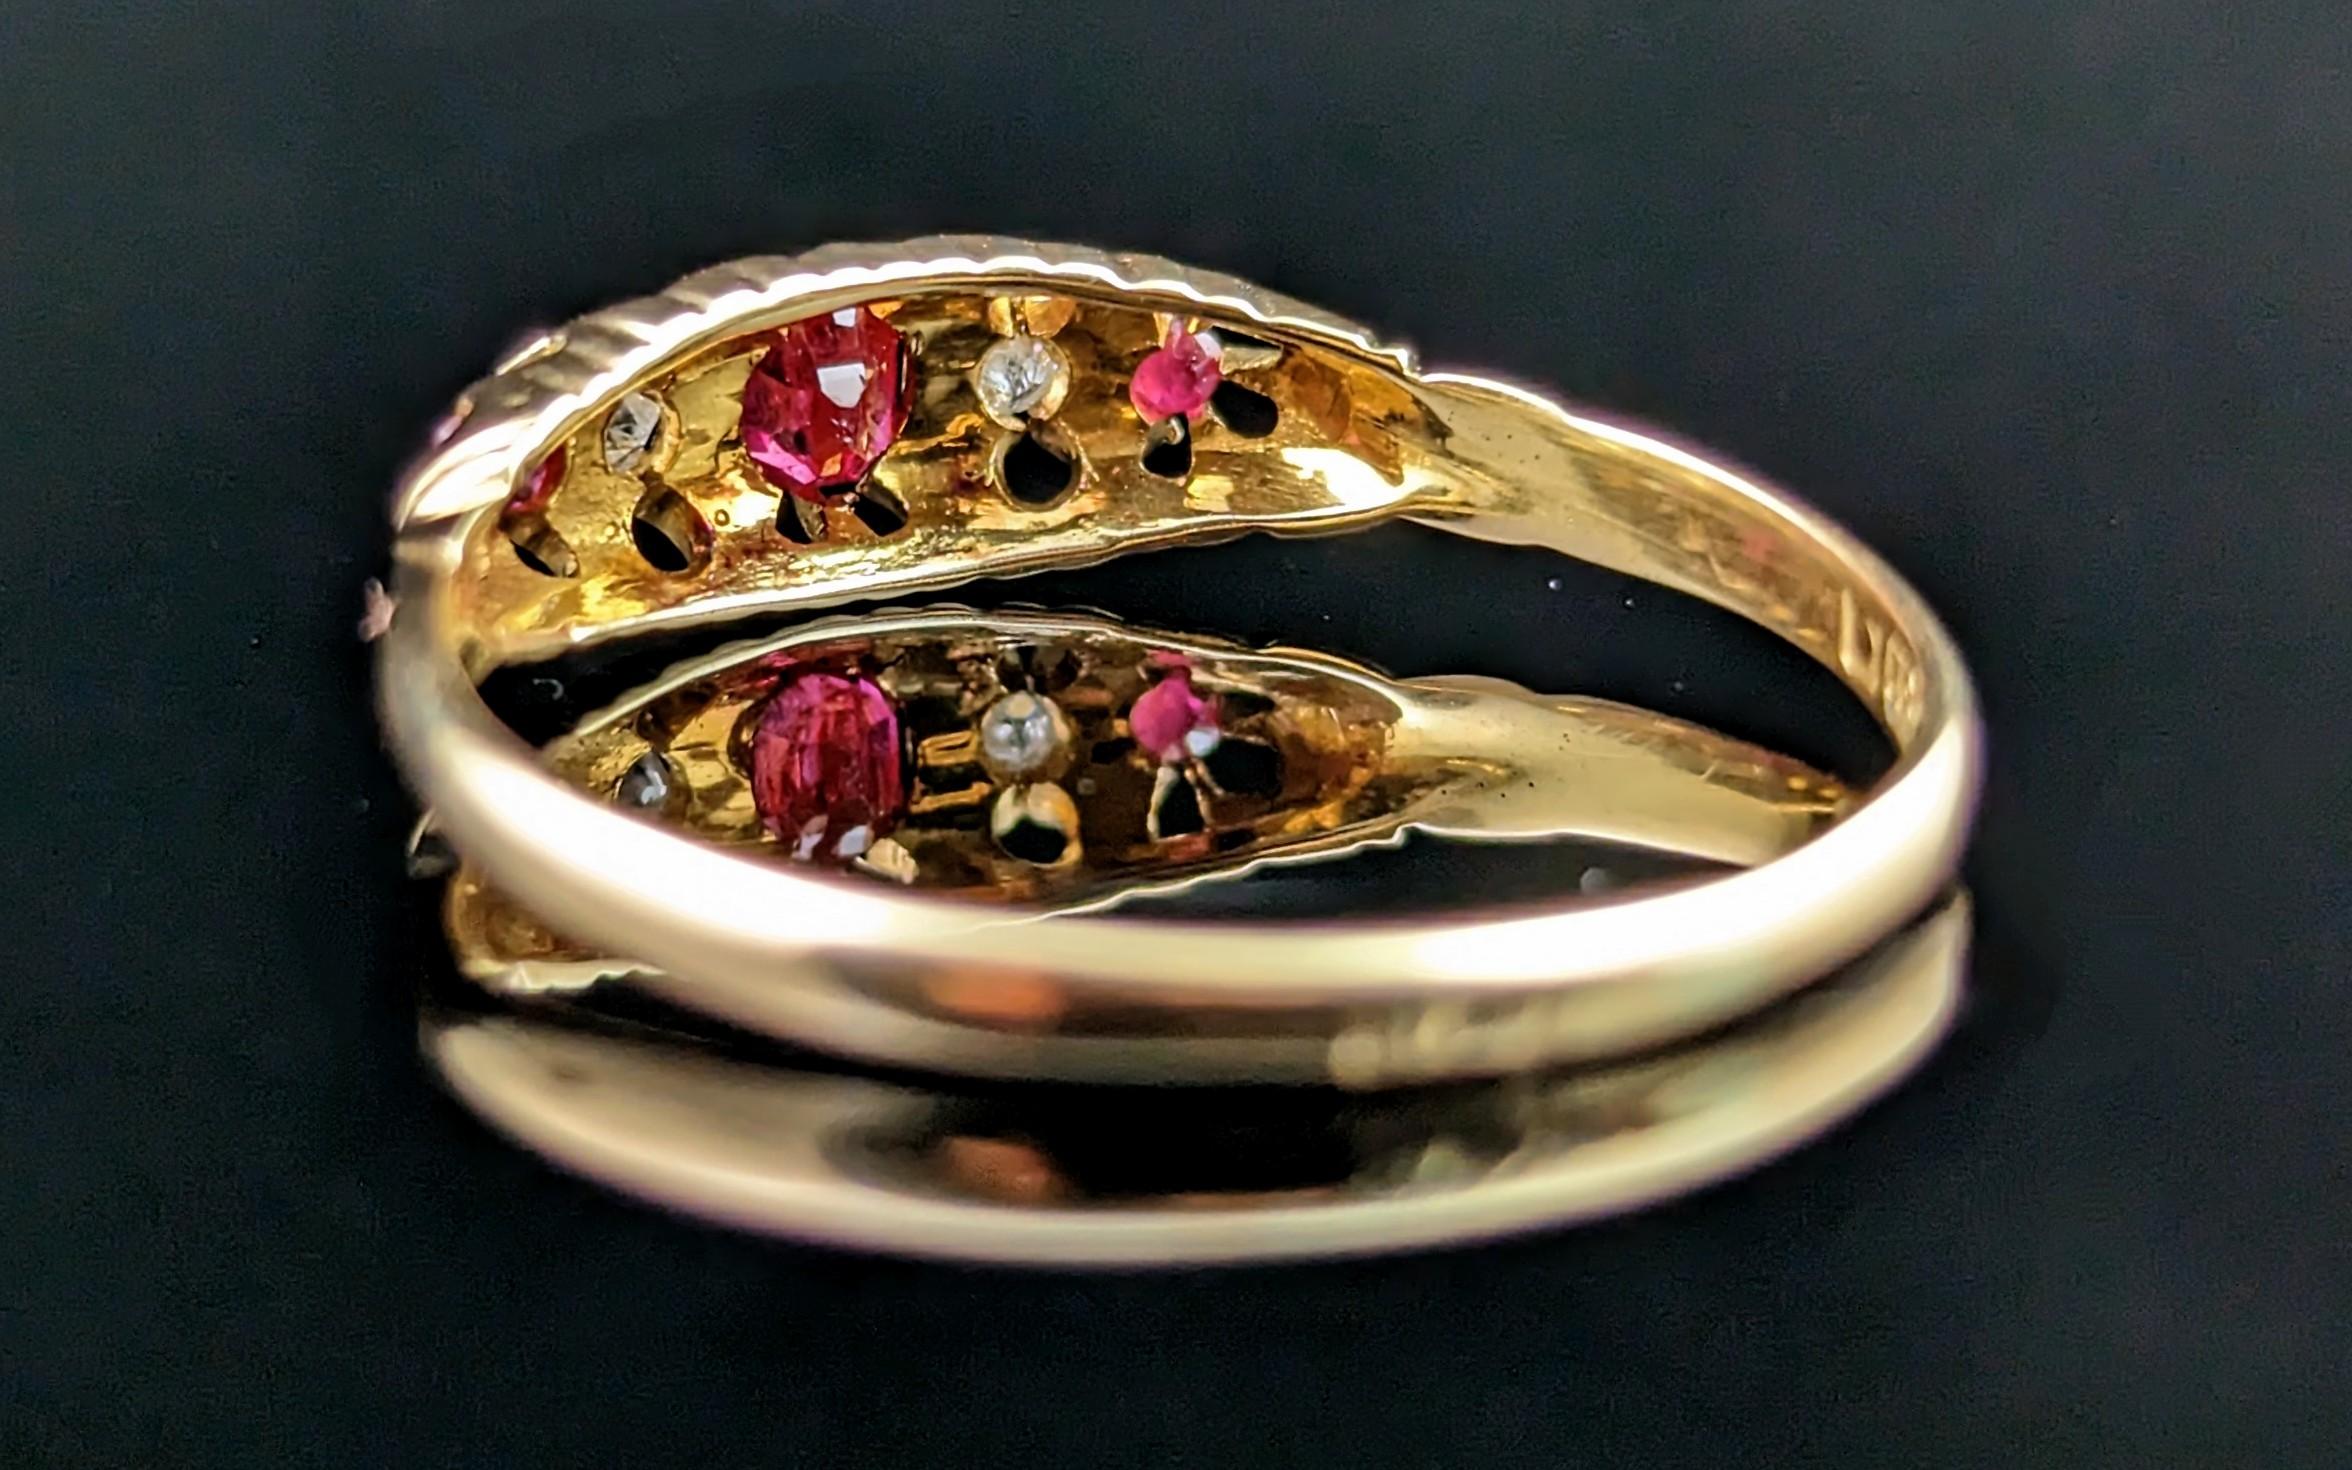 Antique Victorian Ruby and Diamond Ring, 18 Karat Yellow Gold 1